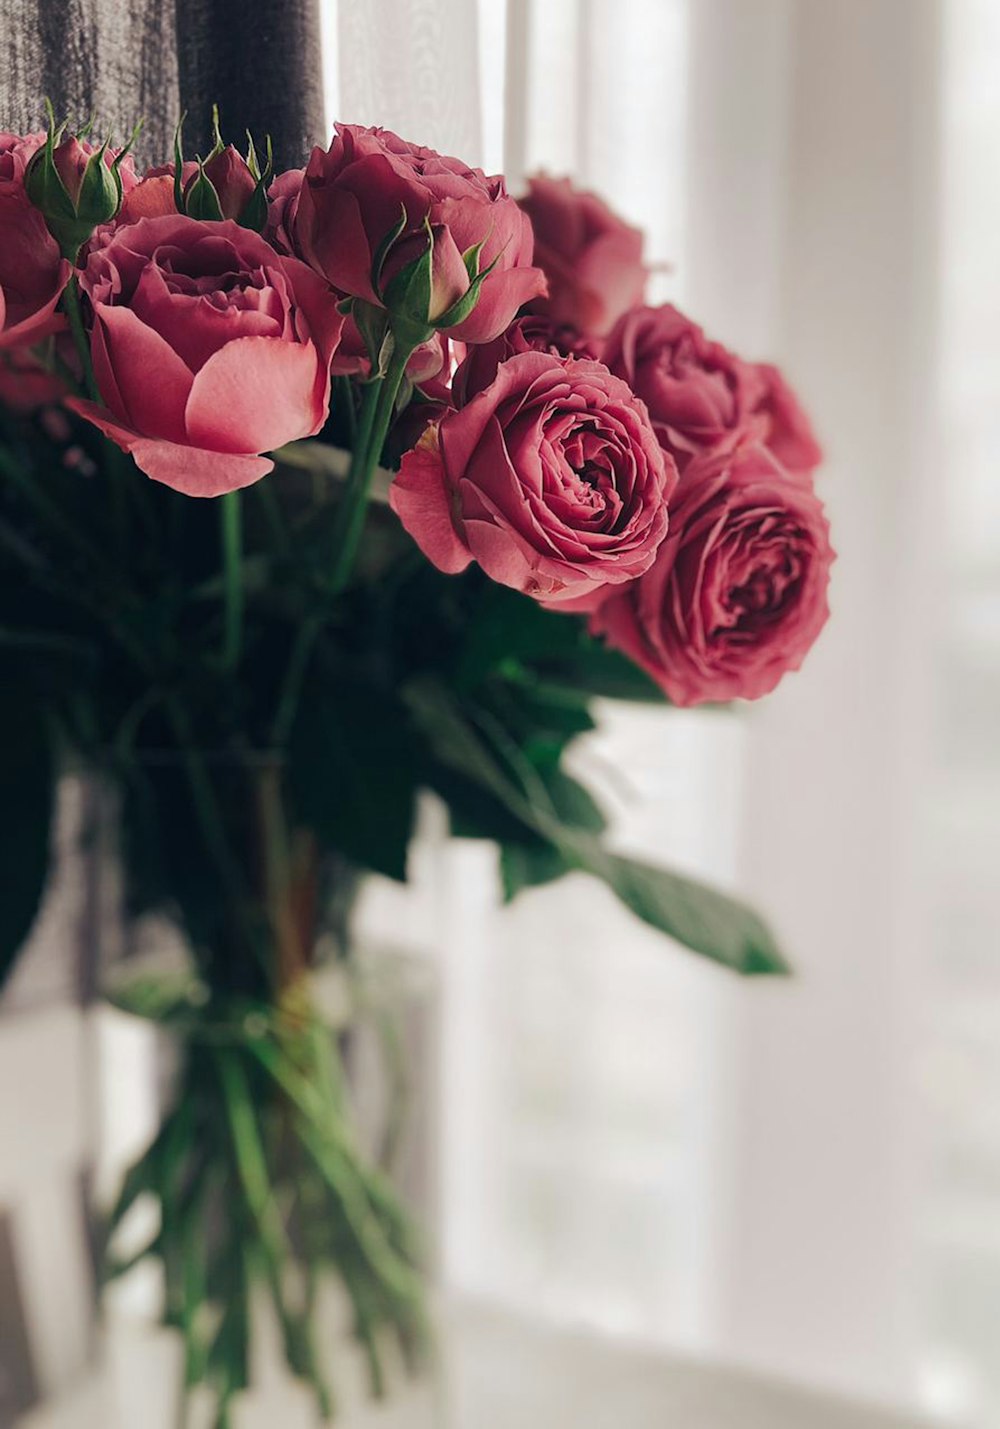 Red Roses Bouquet Pictures Download Free Images On Unsplash